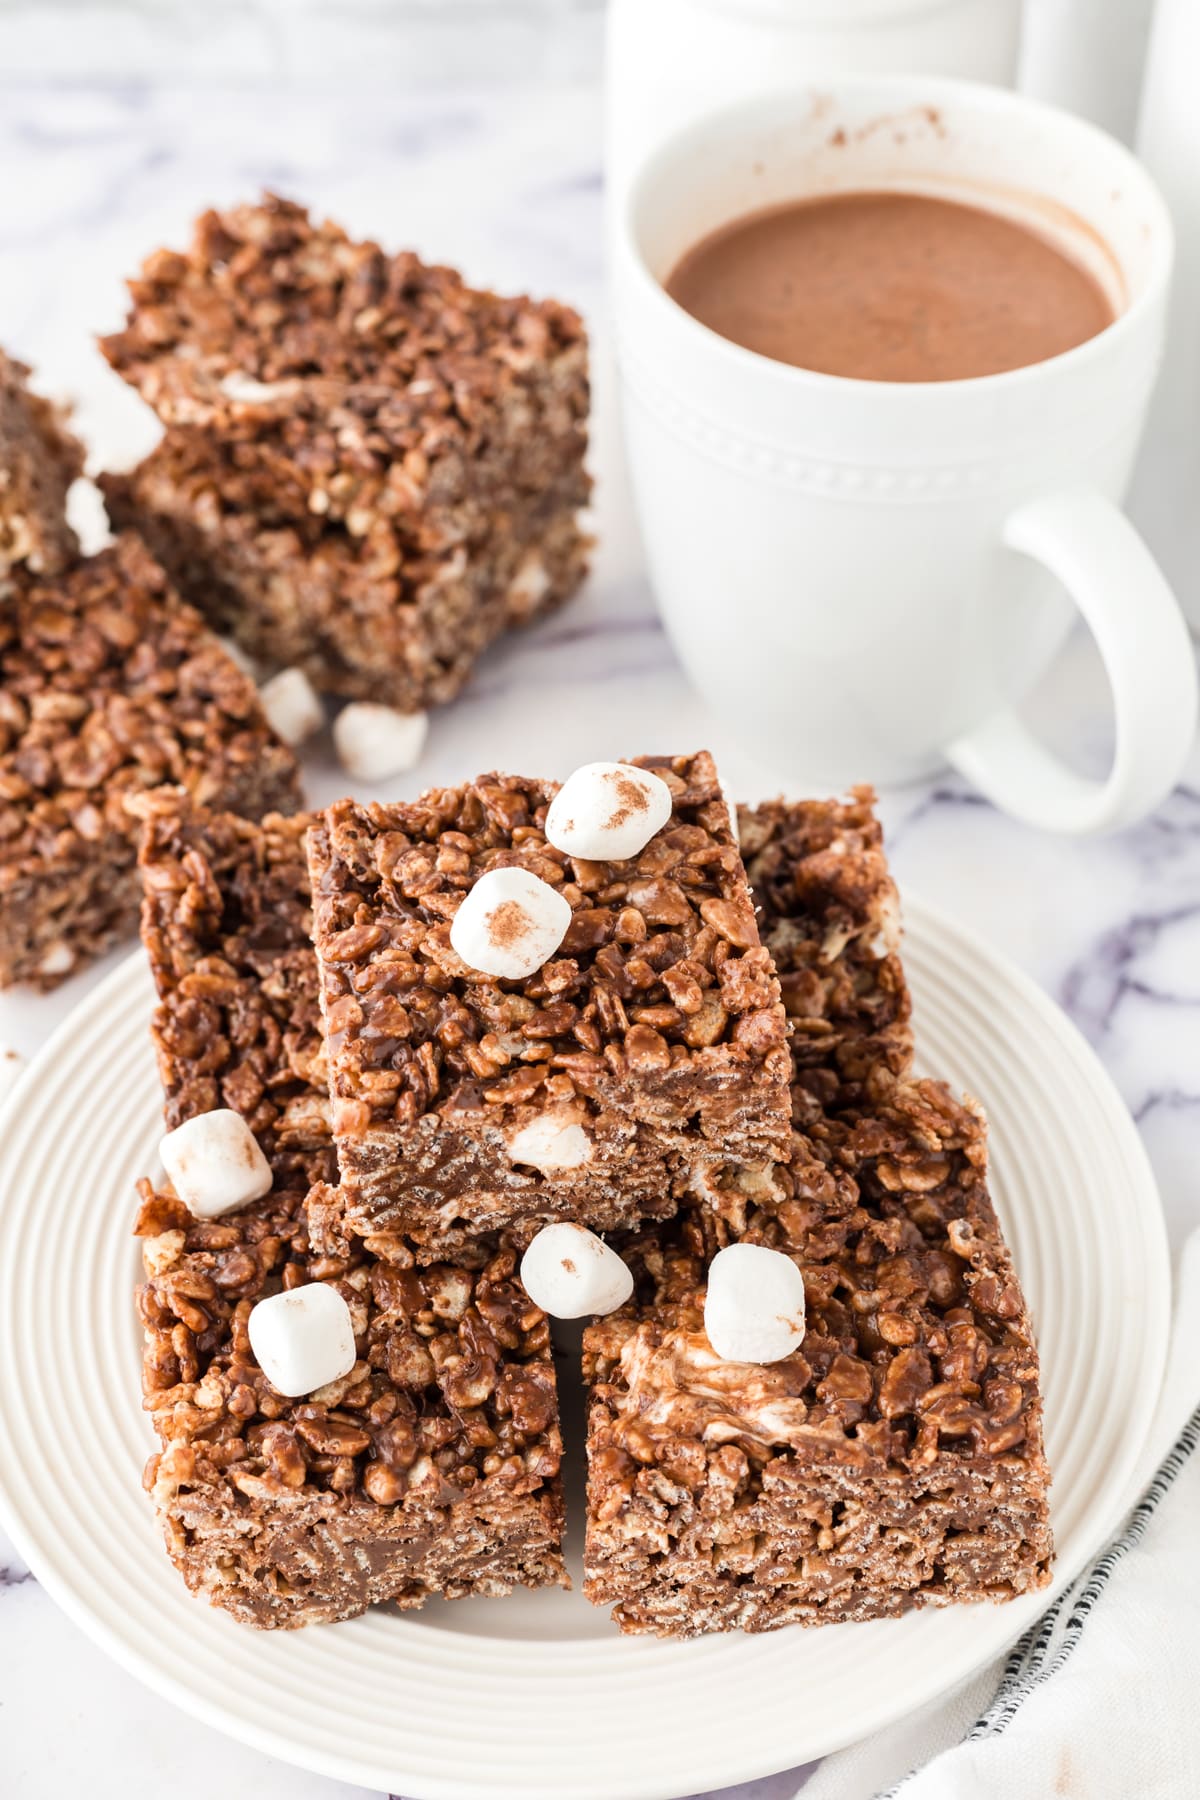 Hot Chocolate Rice Krispy Treats on a plate with a cup of hot chocolate.